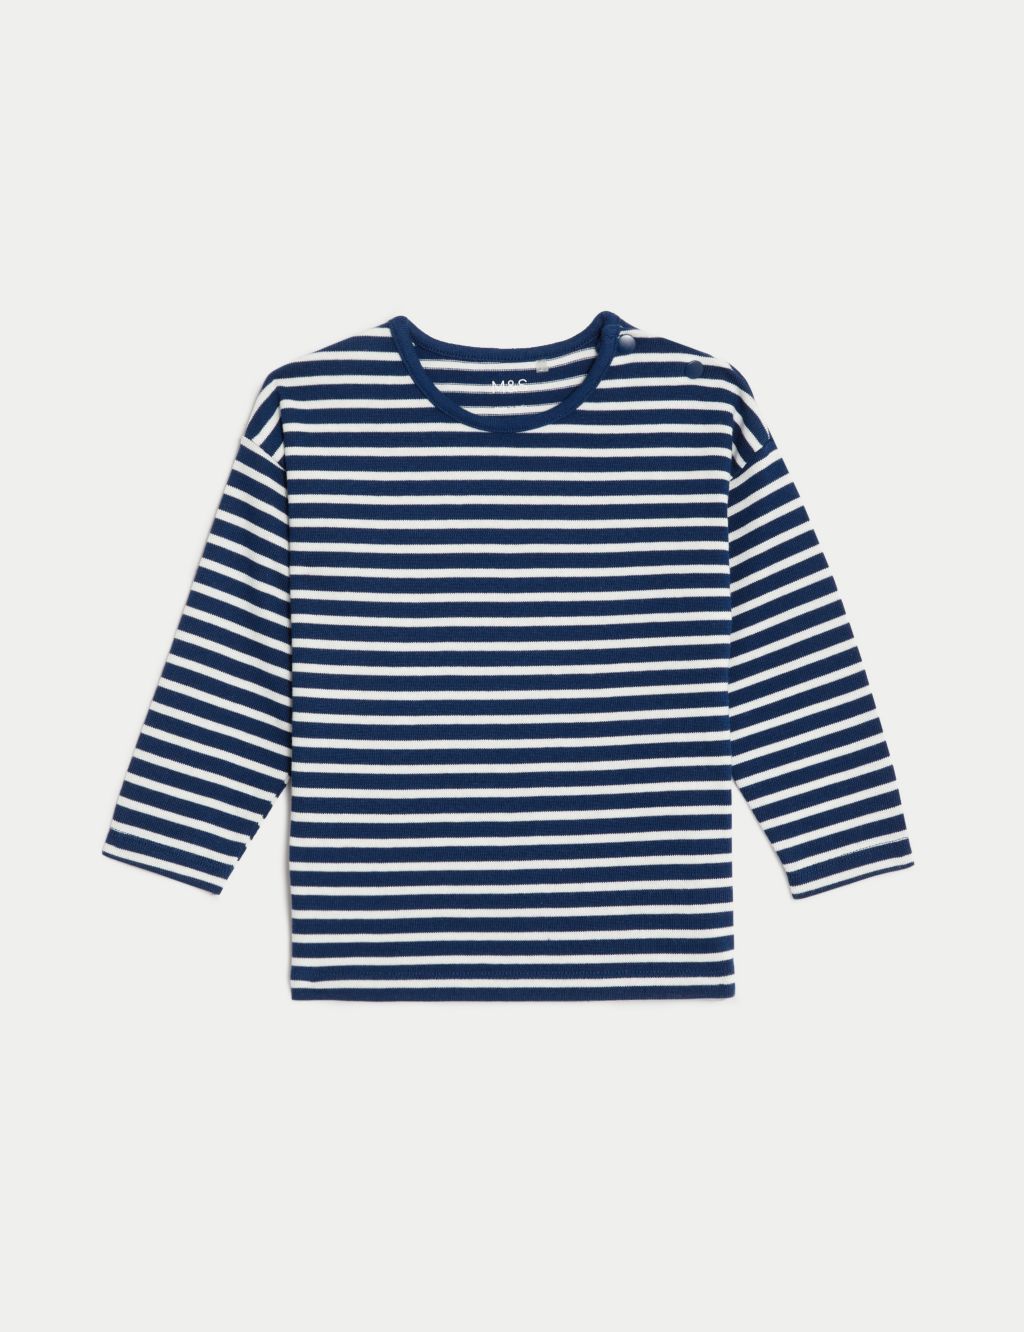 3pk Pure Cotton Striped Tops (0-3 Yrs) image 4